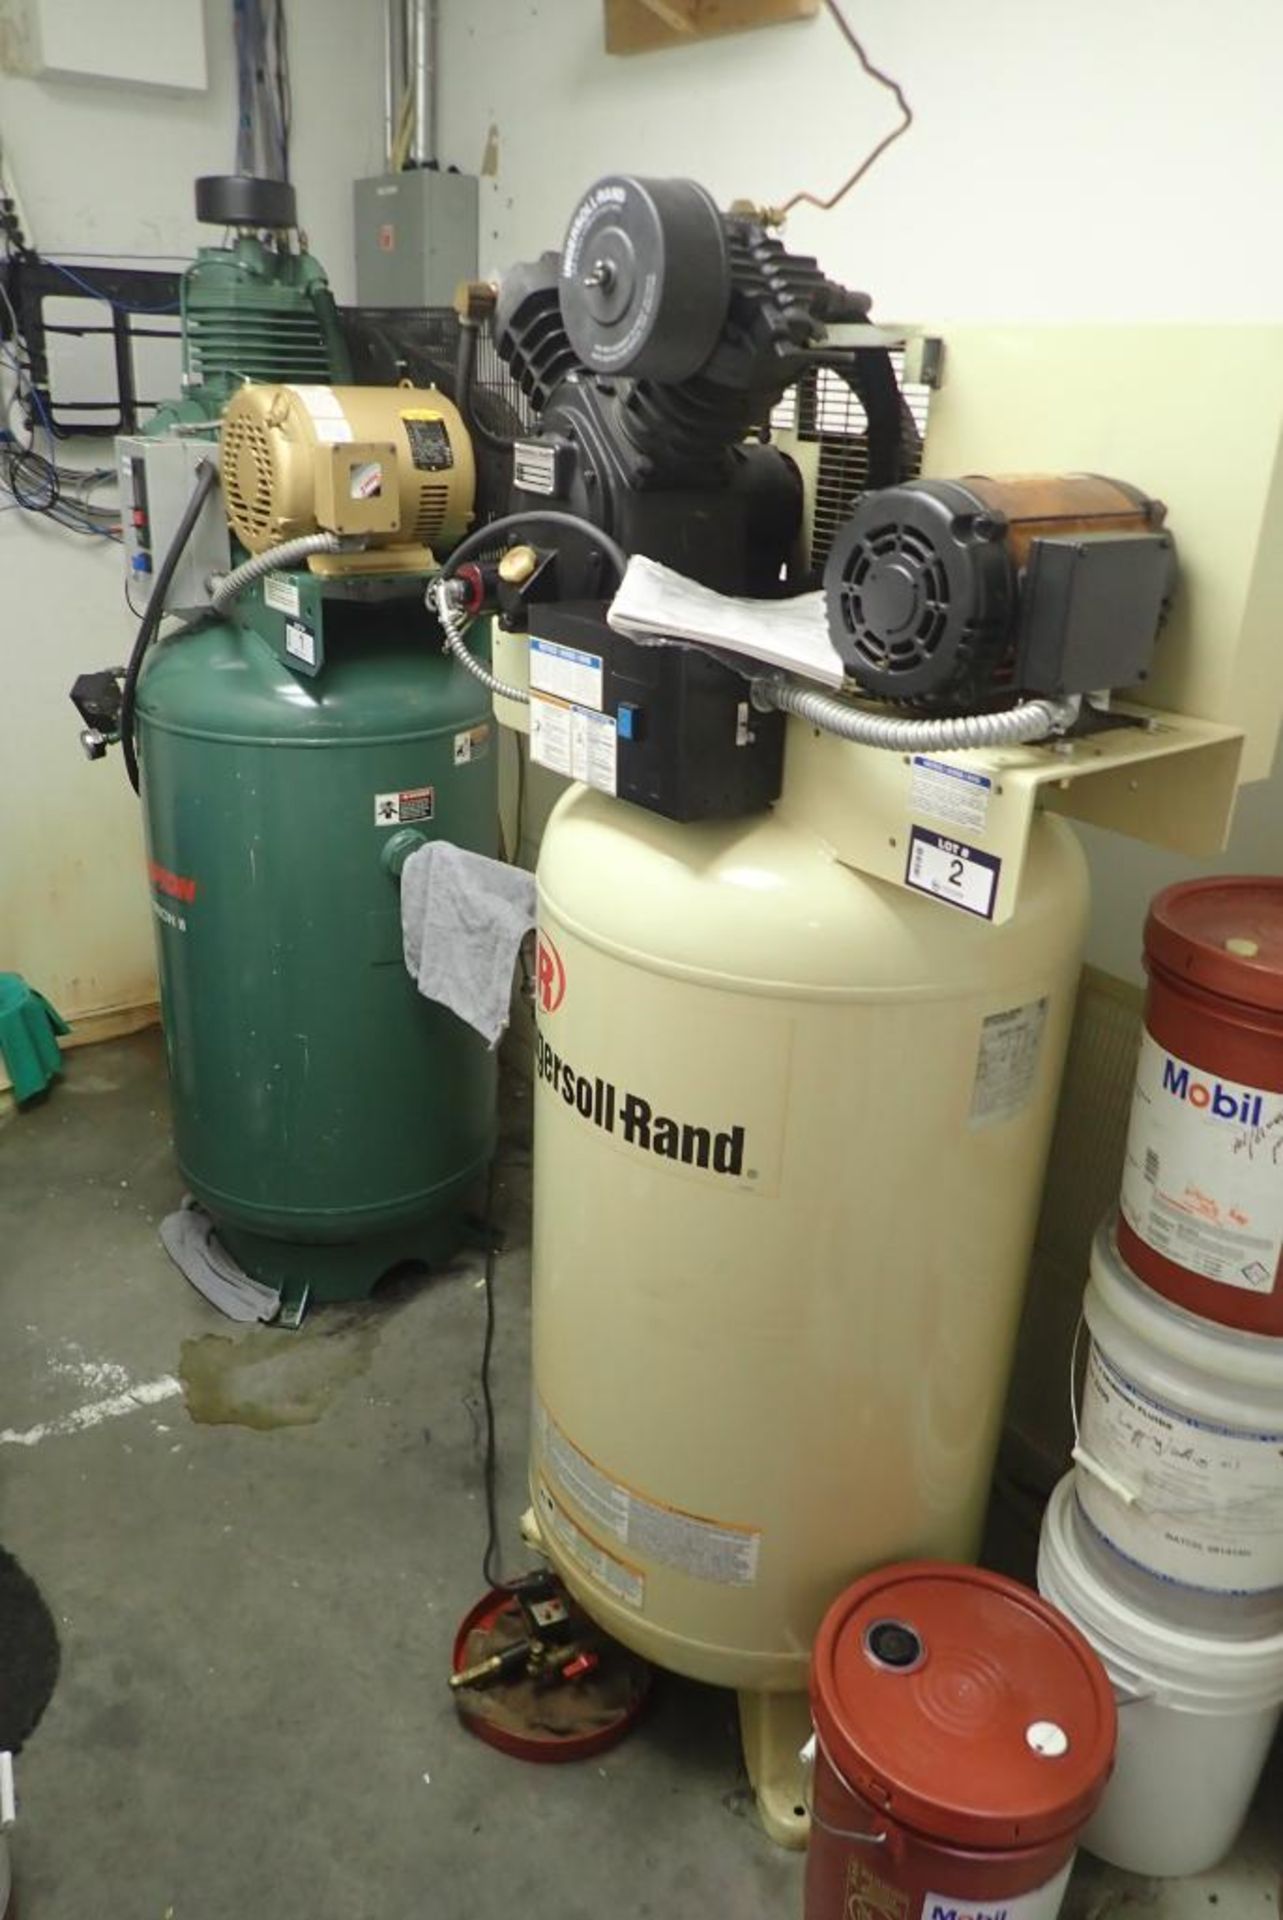 Ingersoll Rand 2475 7.5hp Twin Head Vertical Air Compressor-NOTE NEEDS NEW ELECTRIC MOTOR.